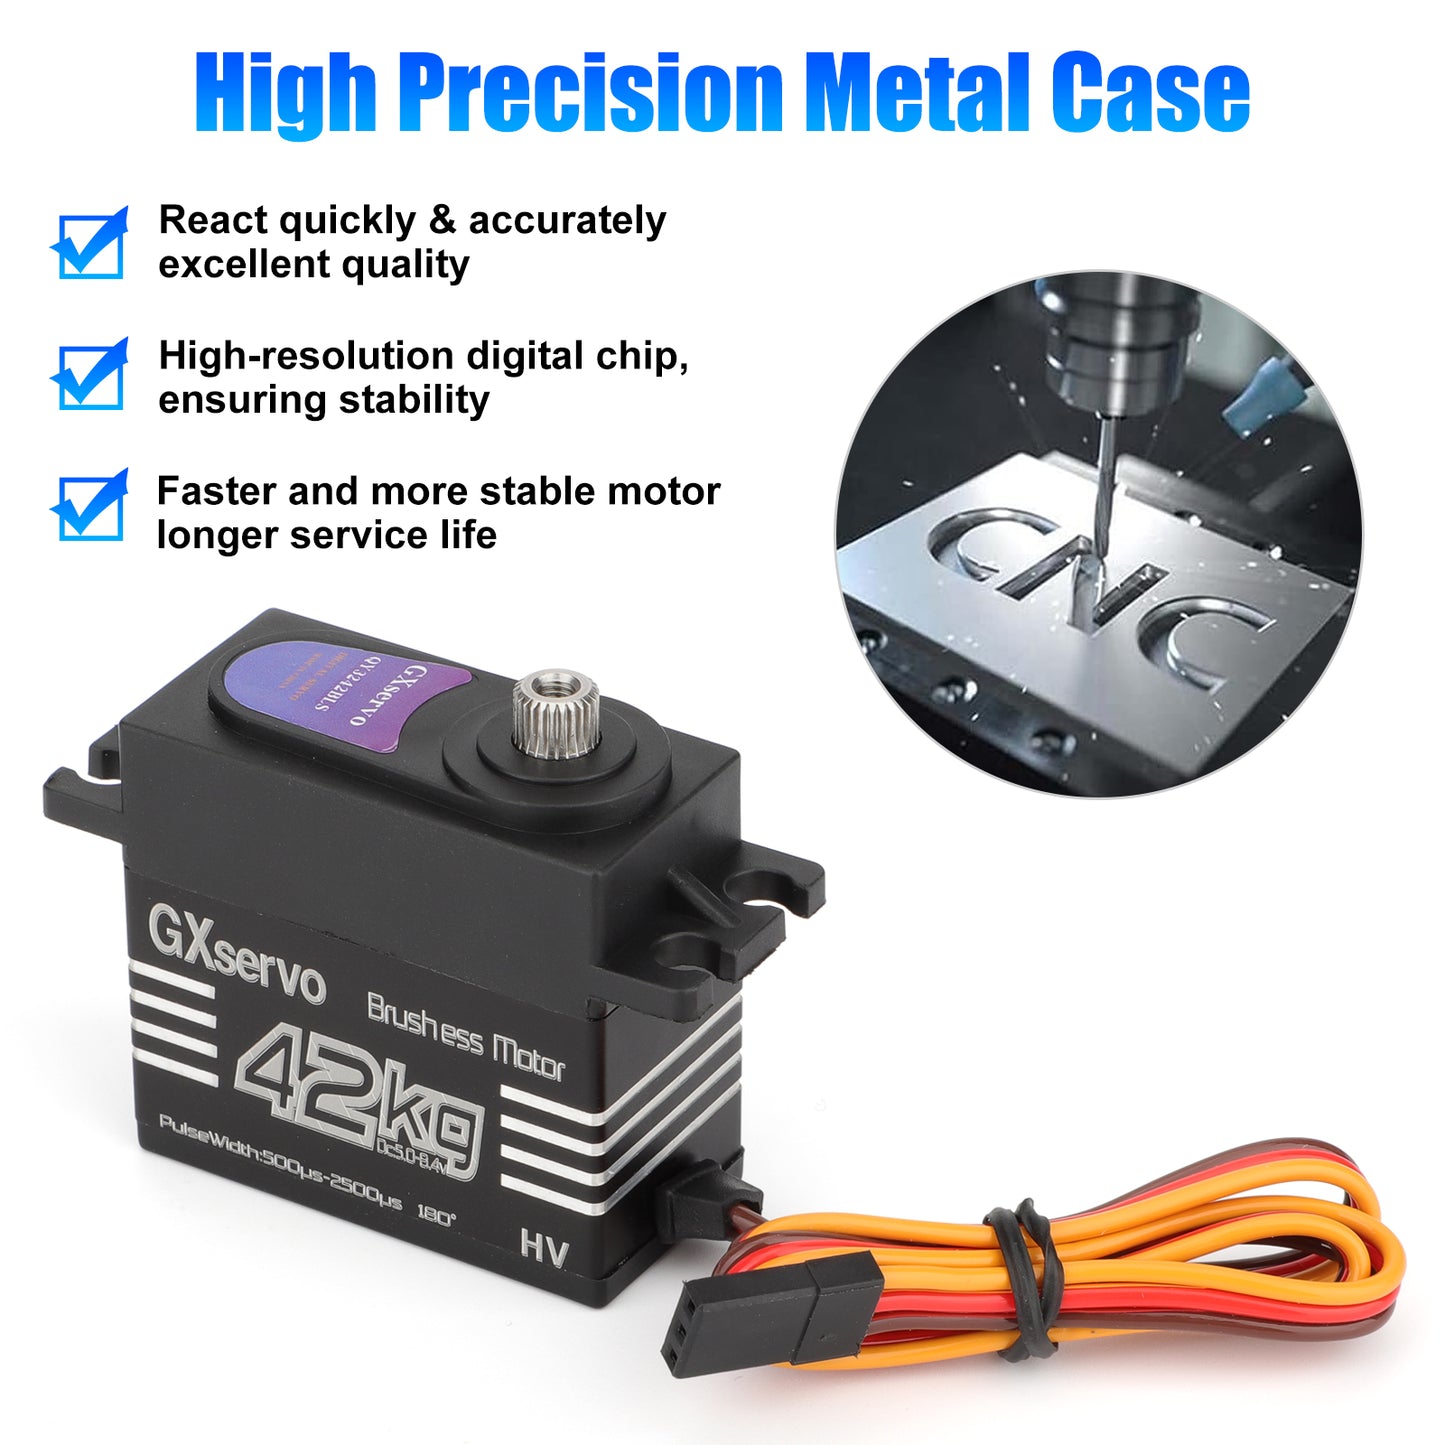 High Torque Waterproof RC Digital Servo - 42kg/cm,Brushless Motor, Precise Control, for 1/8, 1/10 trucks, RC cars, boats, and more